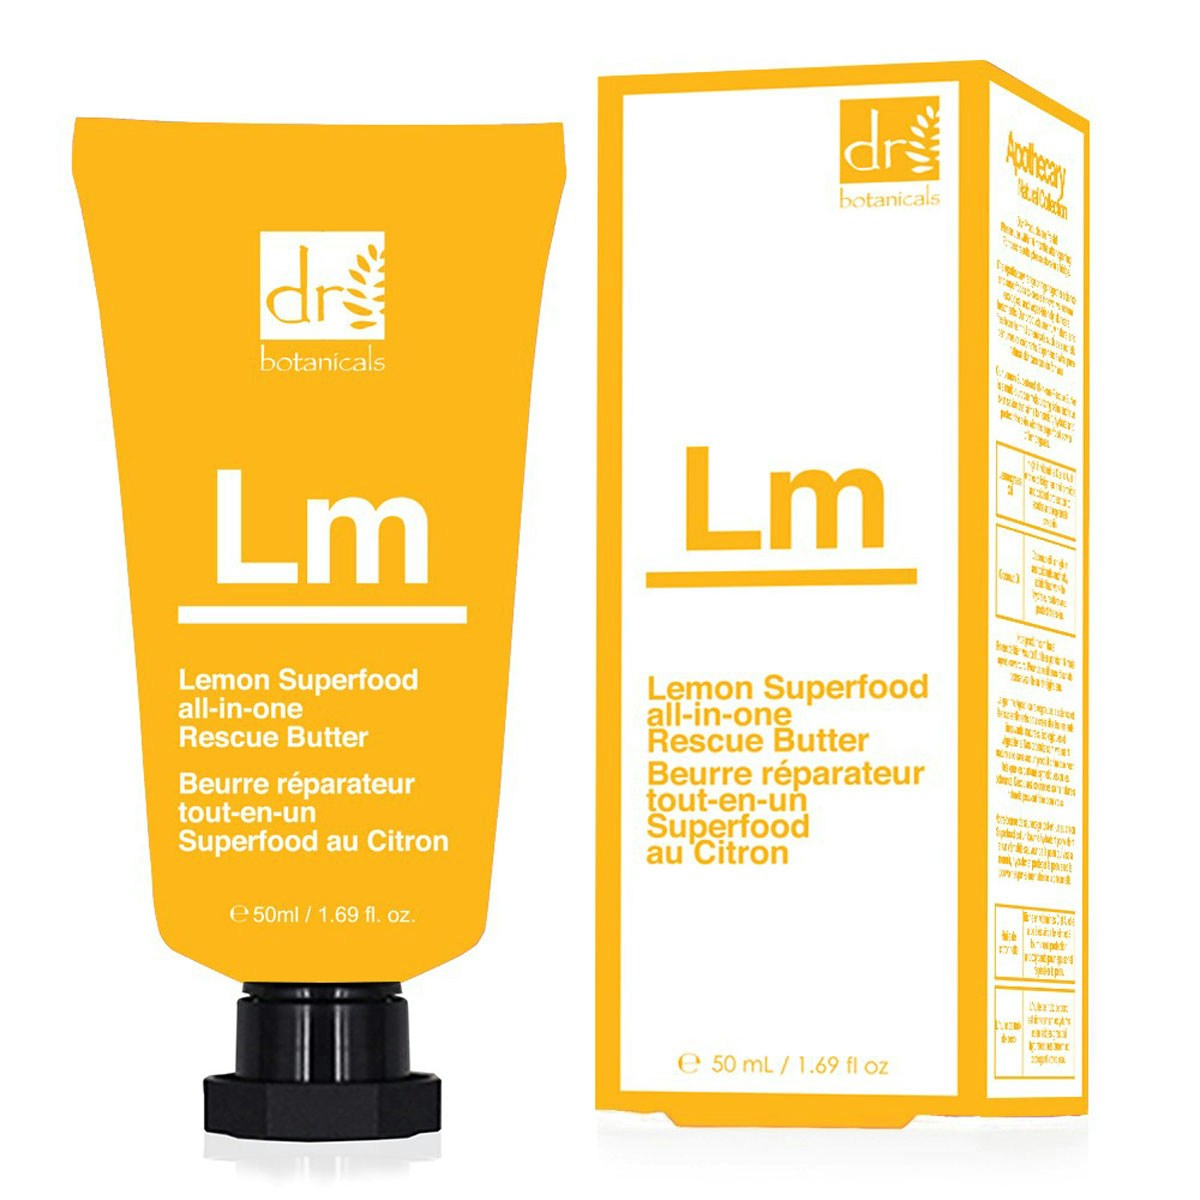 Dr Botanicals Dr Botanicals Apothecary Collection - Lemon Superfood all-in-one Rescue Butter - 50ml